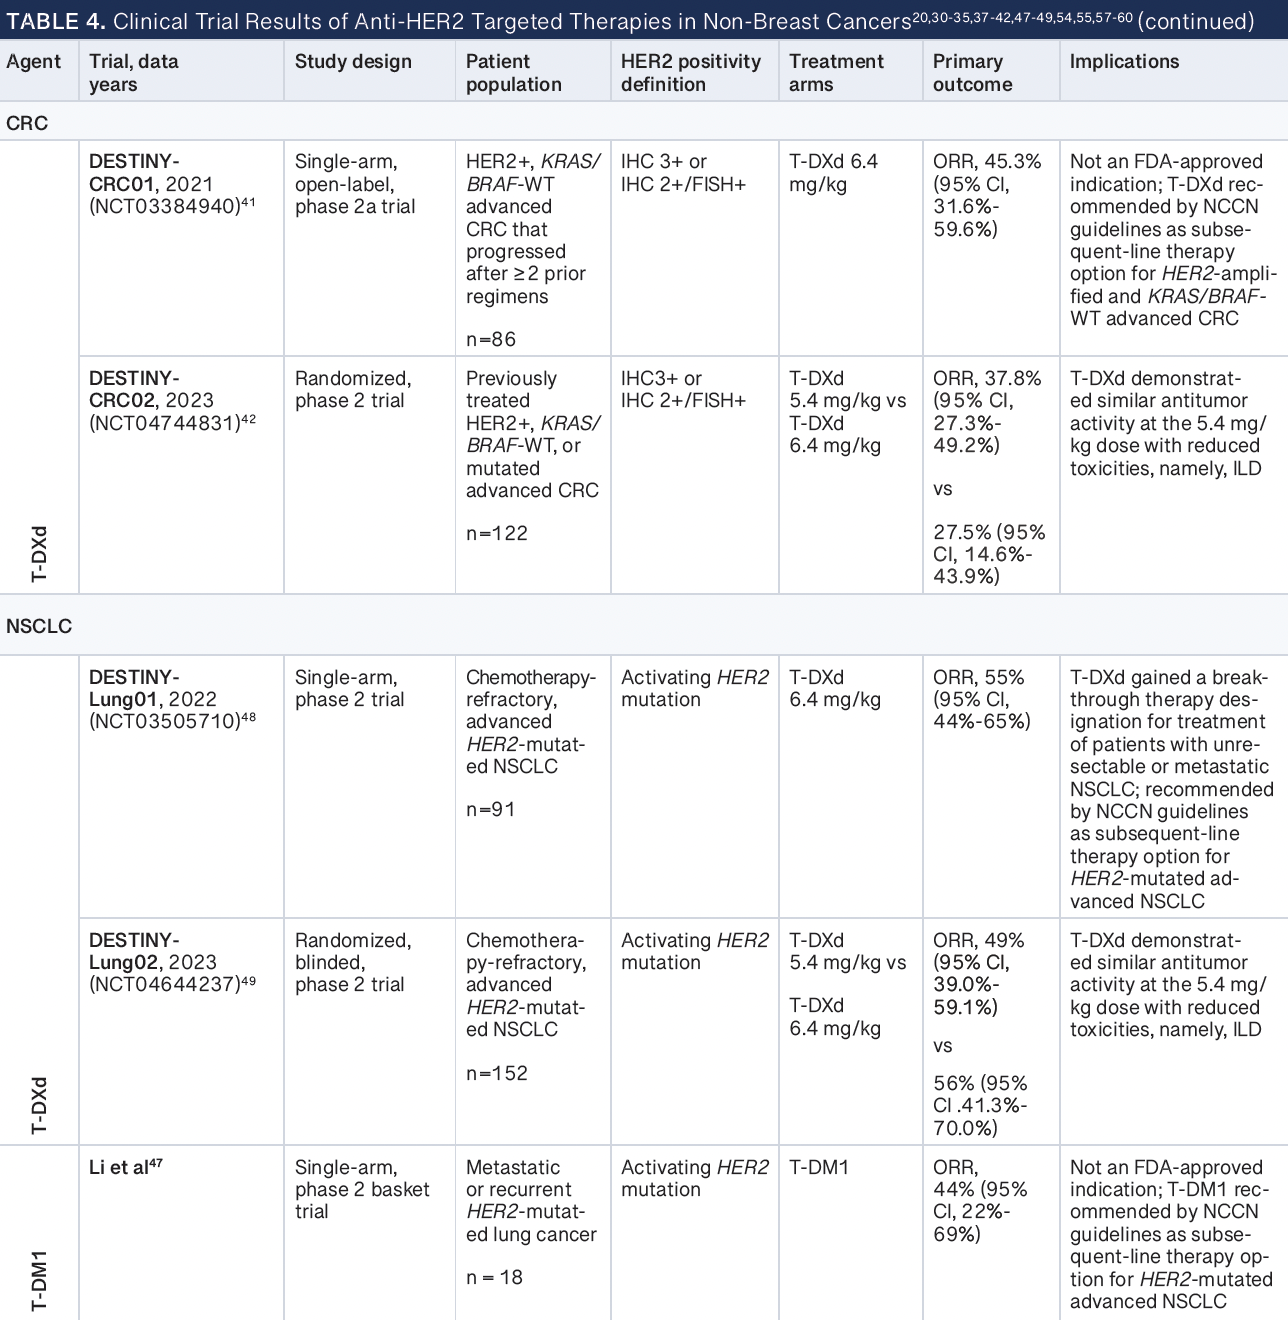 Table 4 (cont.) -- CRC, colorectal cancer; FISH, fluorescence in situ hybridization; IHC, immunohistochemistry; ILD, interstitial lung disease; NCCN, National Comprehensive Cancer Network; NSCLC, non–small cell lung cancer; ORR, objective response rate; T-DXd, trastuzumab deruxtecan; WT, wild type.